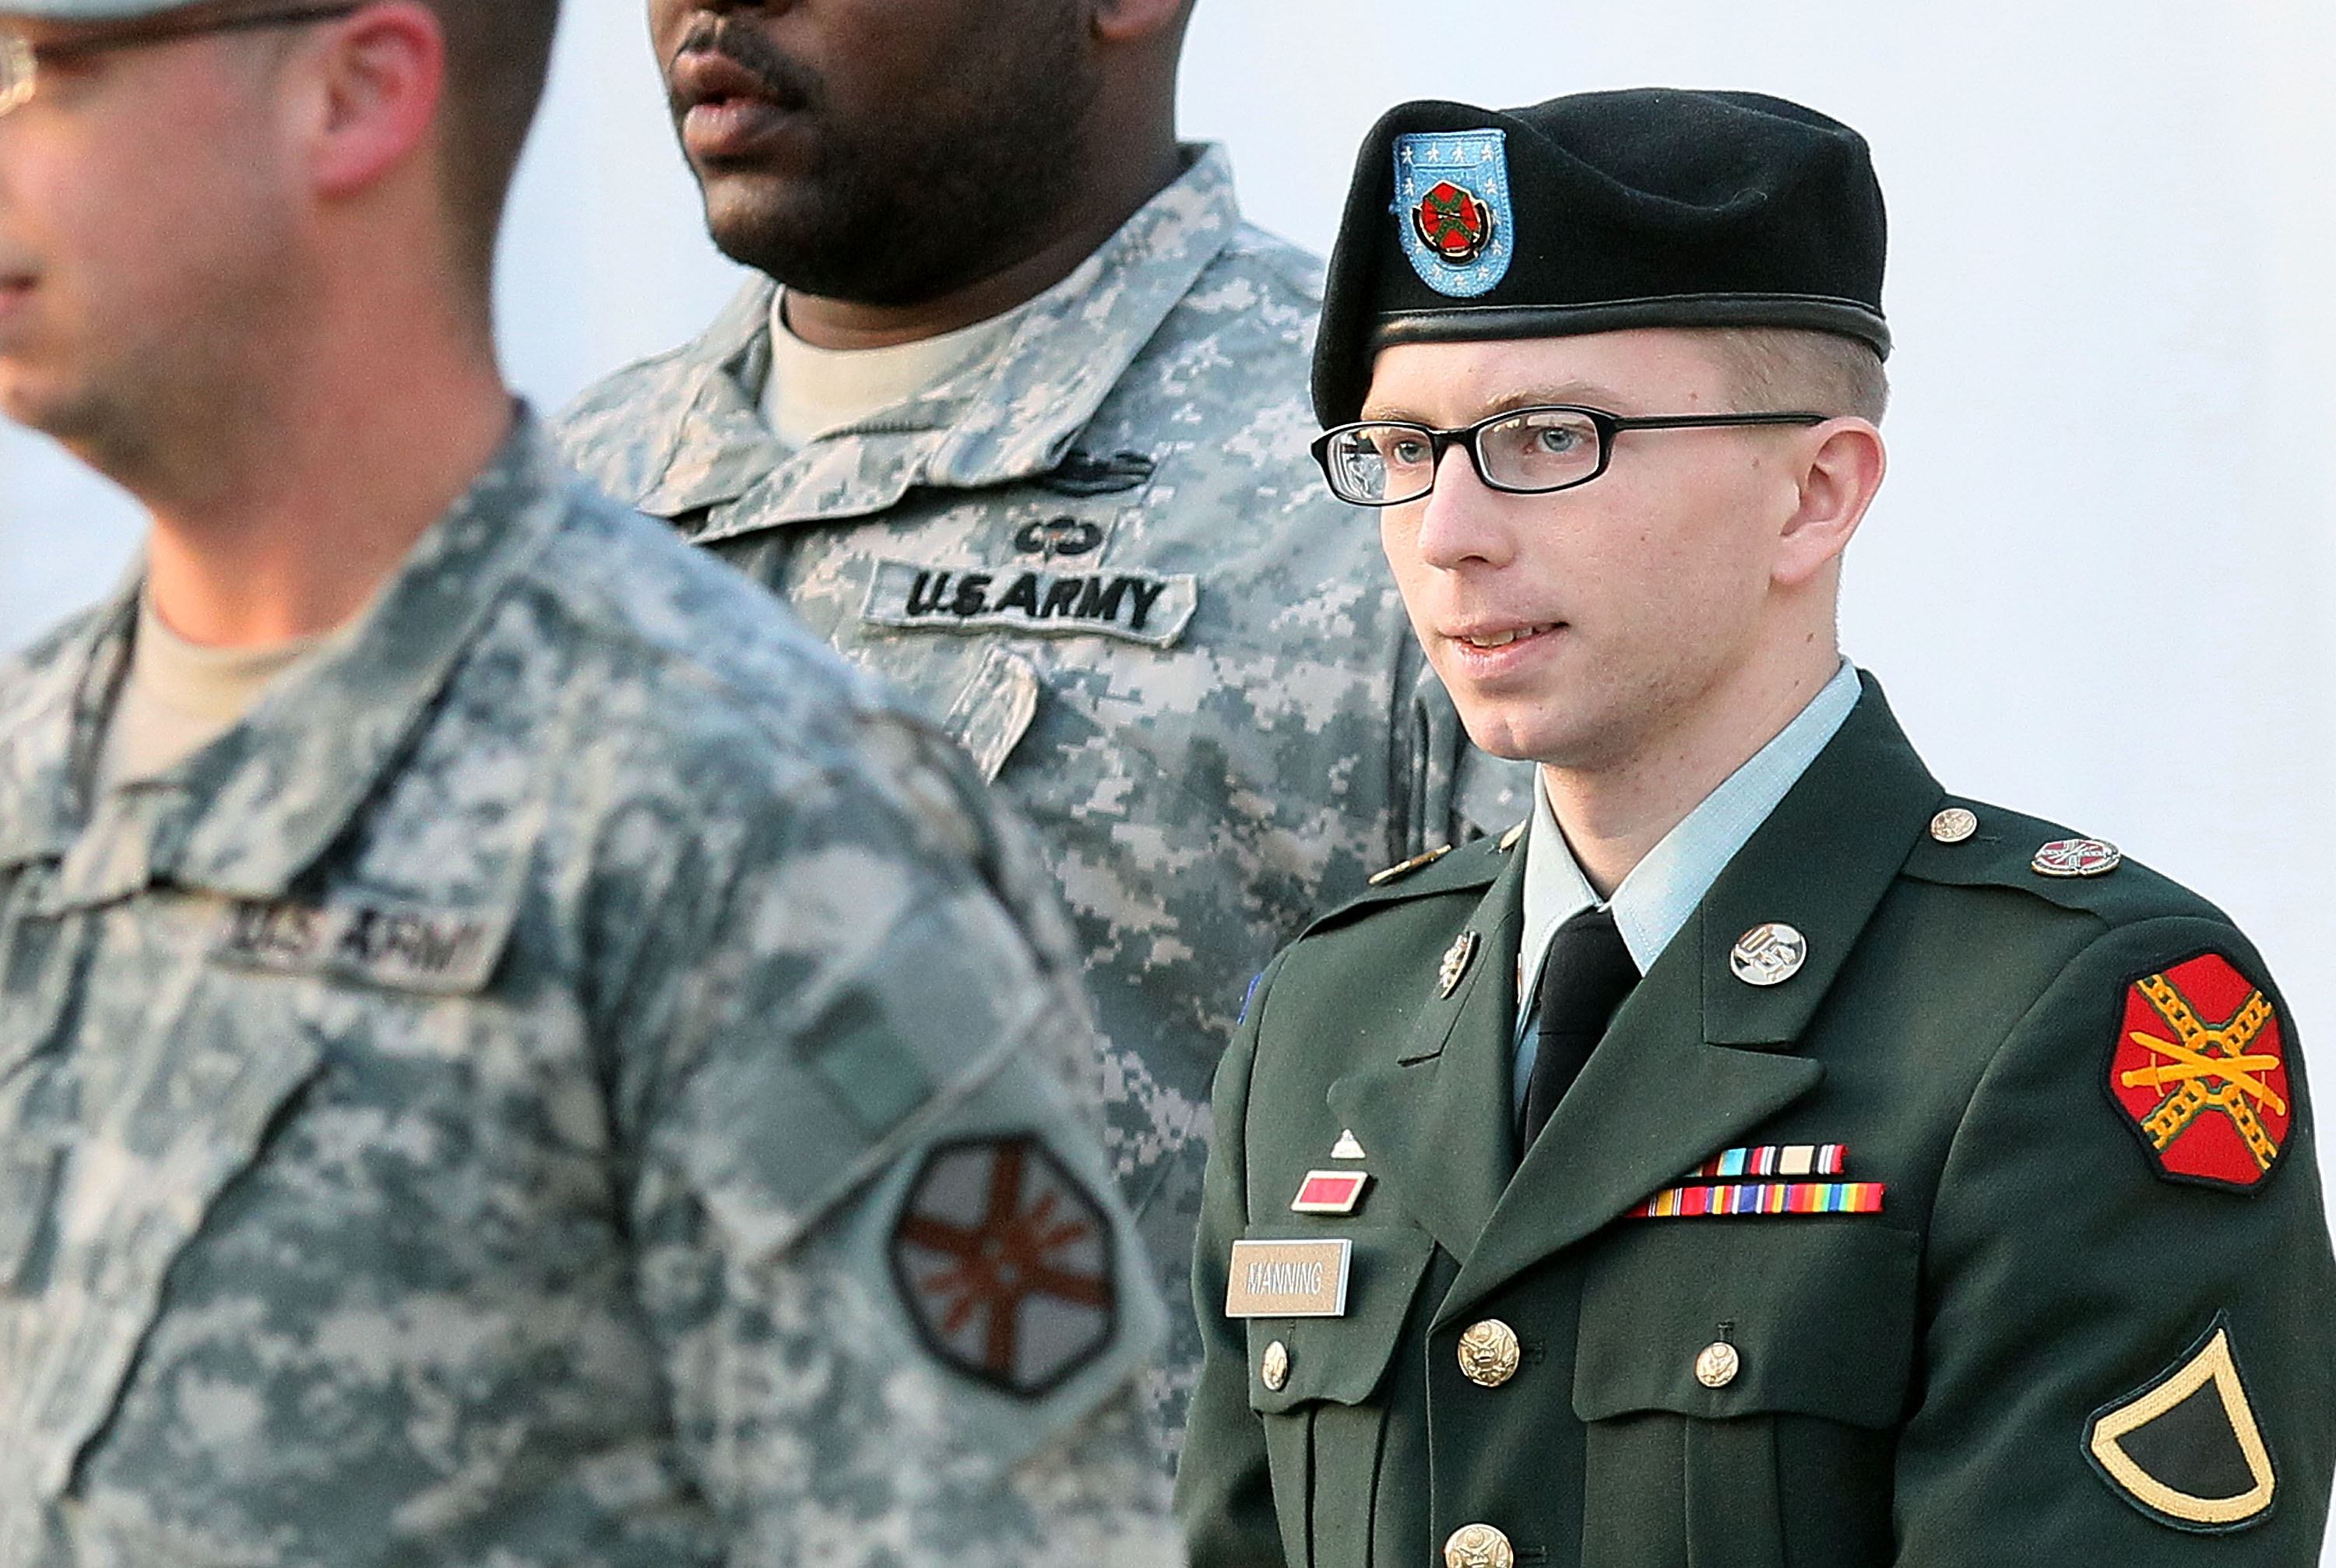 how did bradley manning threaten the state’s monopoly over the use of force